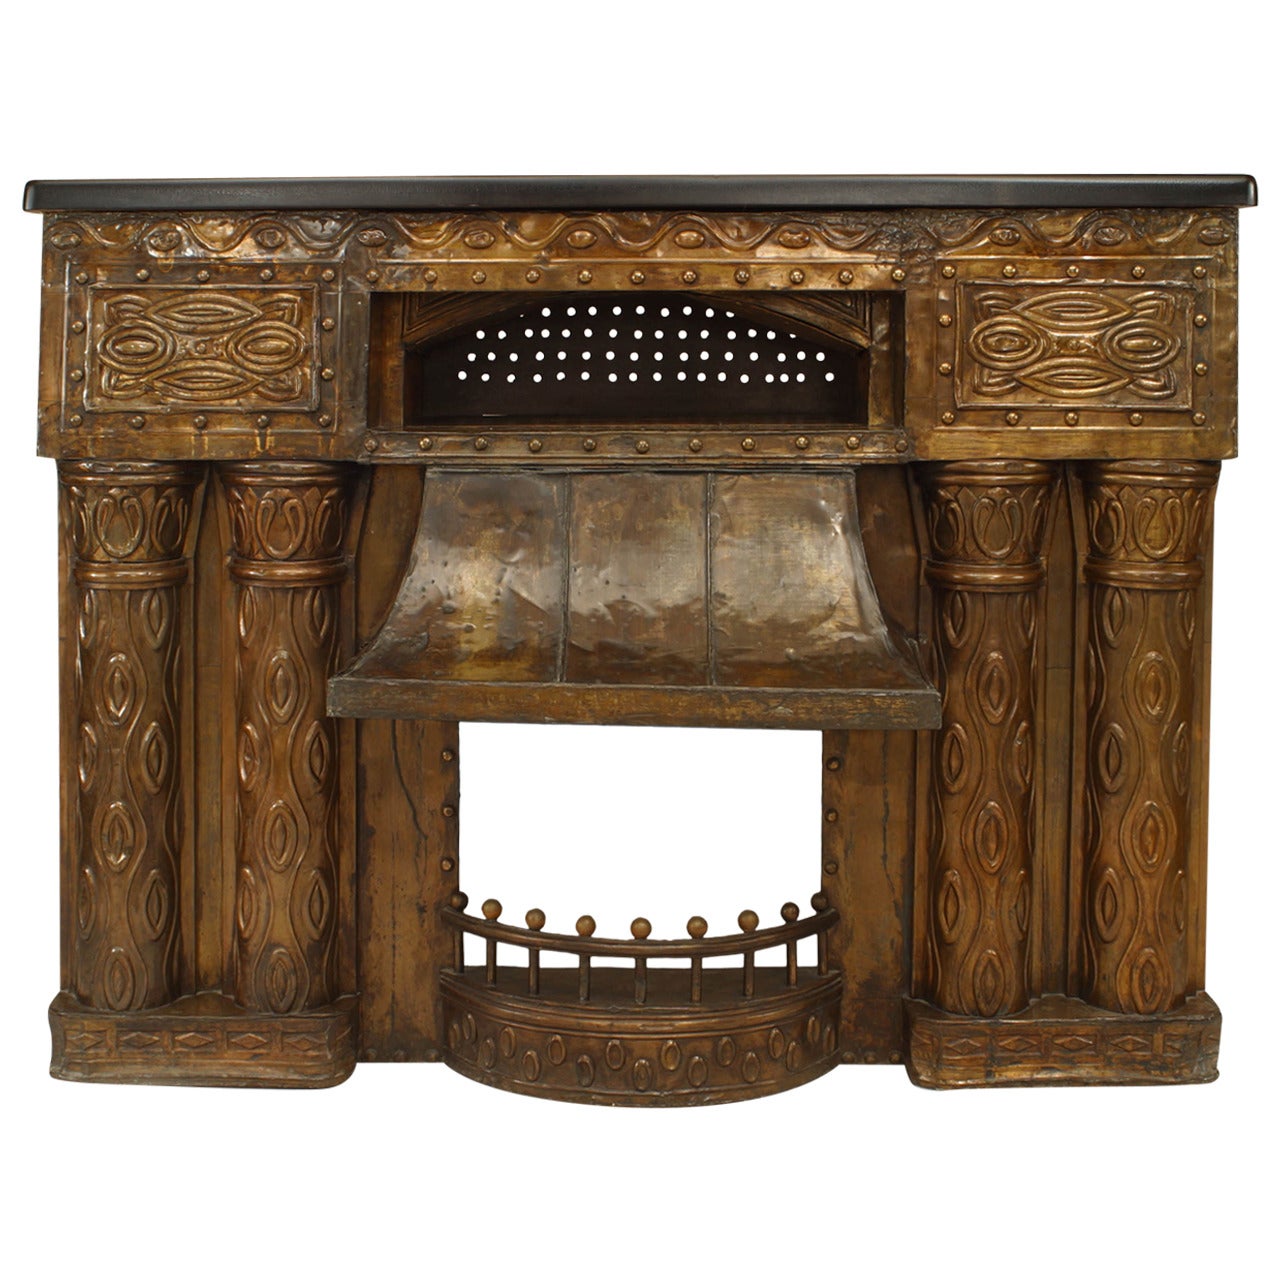 Austrian Secessionist Embossed Brass Fireplace For Sale